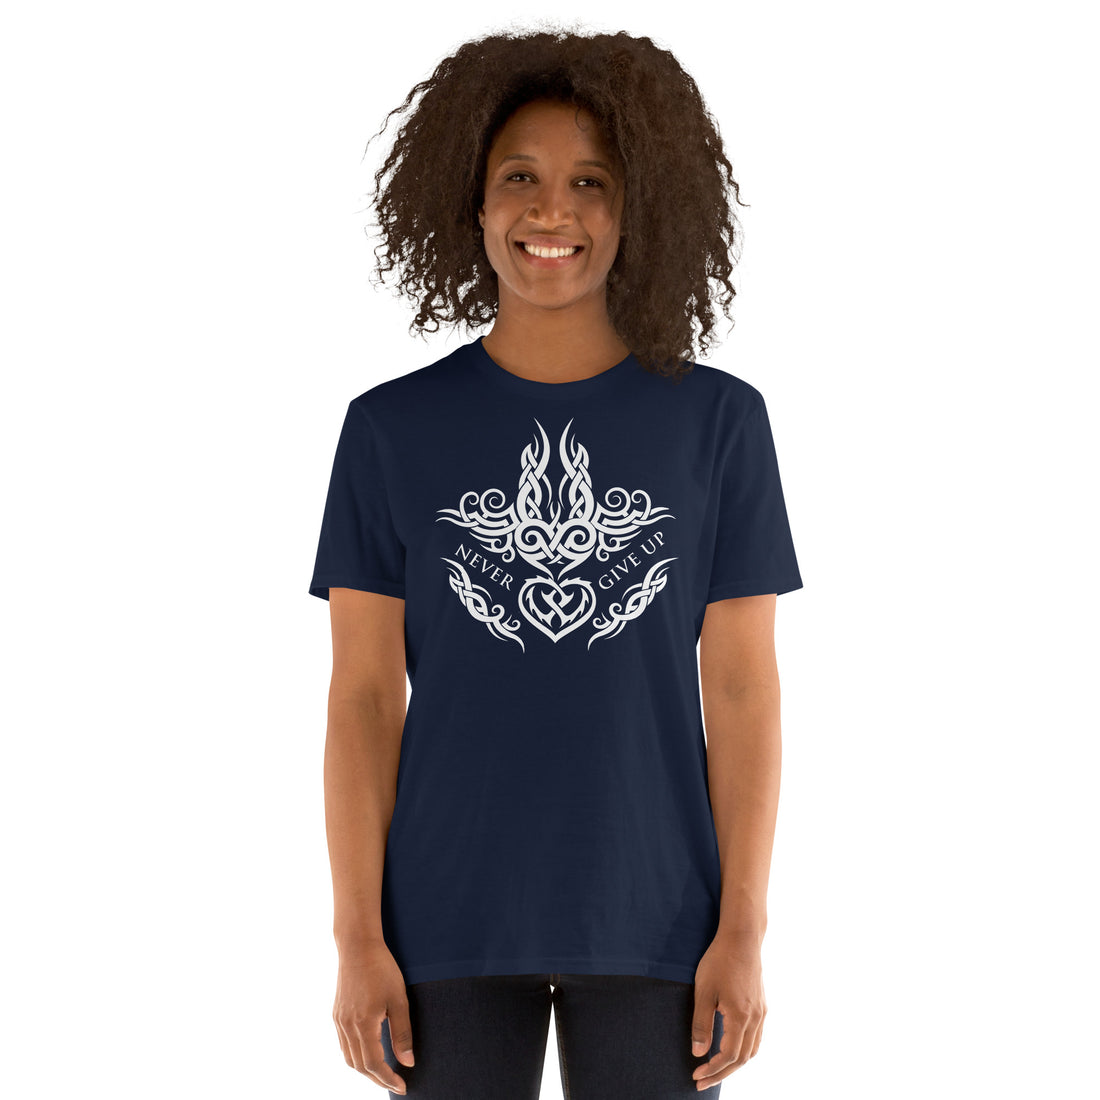 Never Give Up T-Shirt - motivational message Tee, Celtic ornament - heart, thorns, fire, and waves